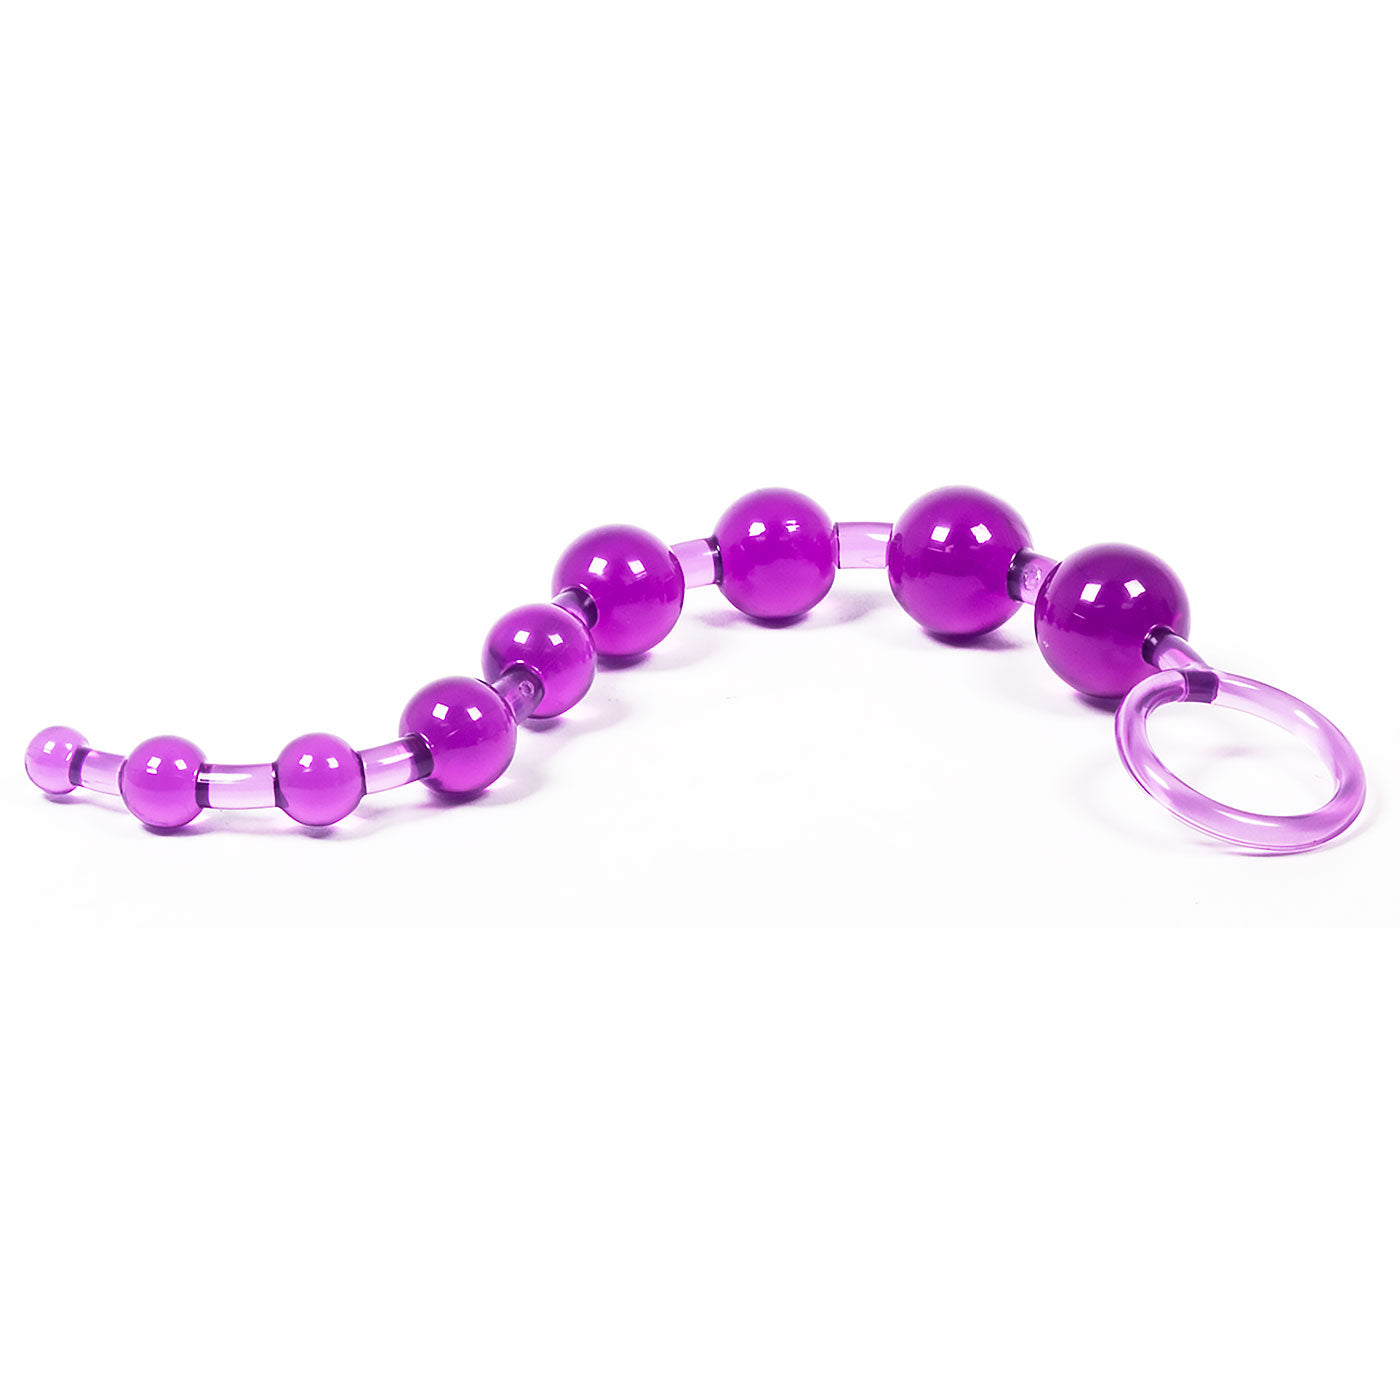 Cloud 9 Classic Graduated Waterproof Anal Beads For Beginners